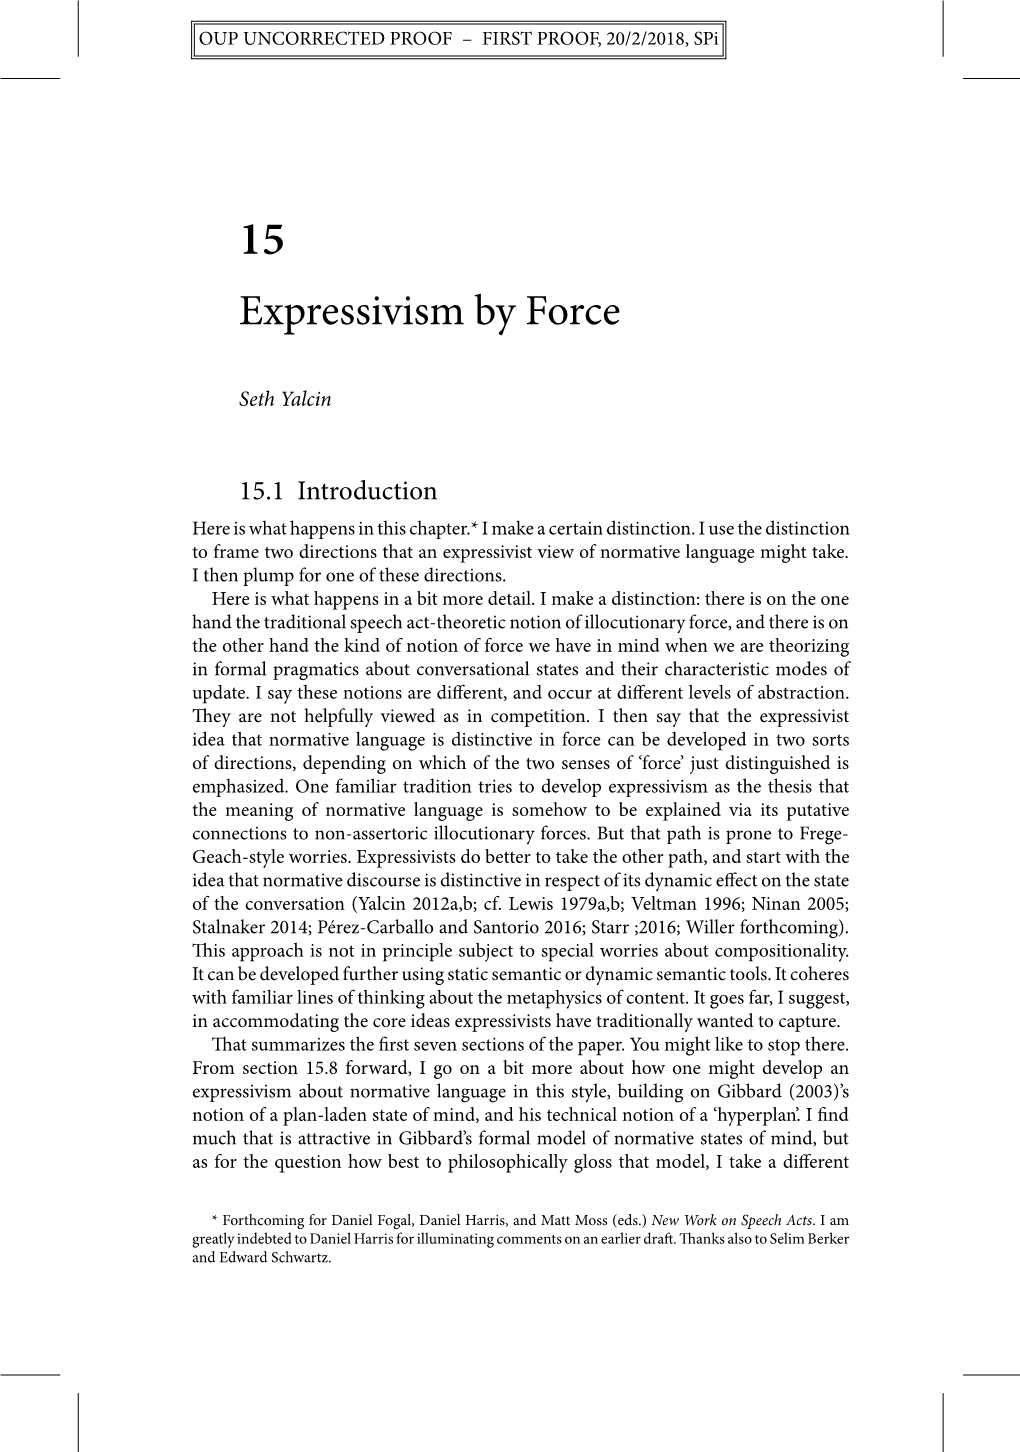 Expressivism by Force